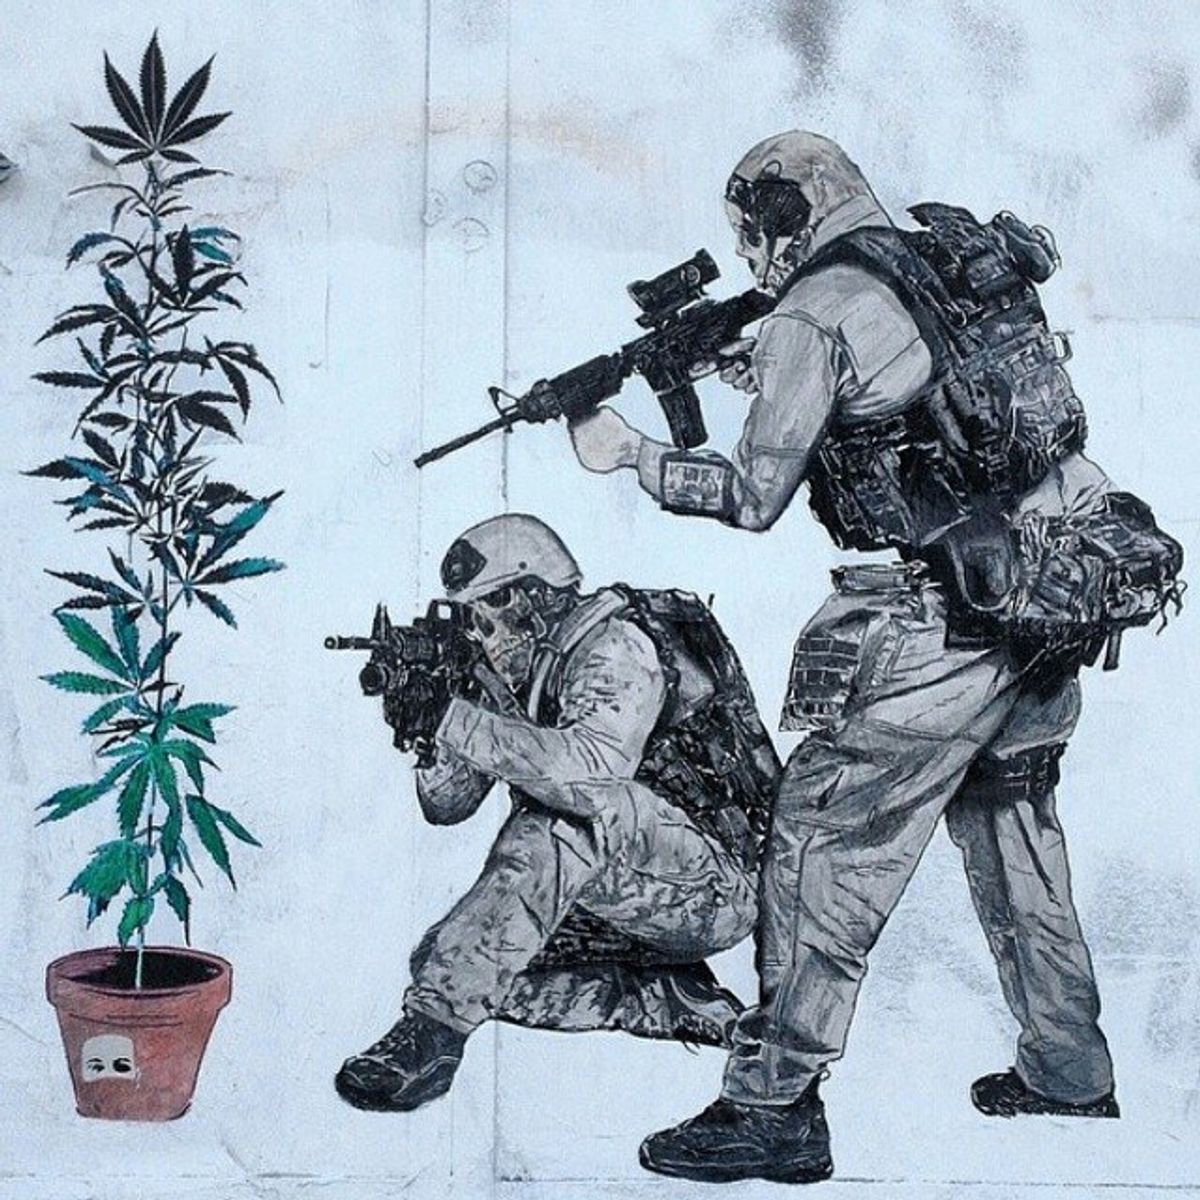 The Idealogical War on Drugs